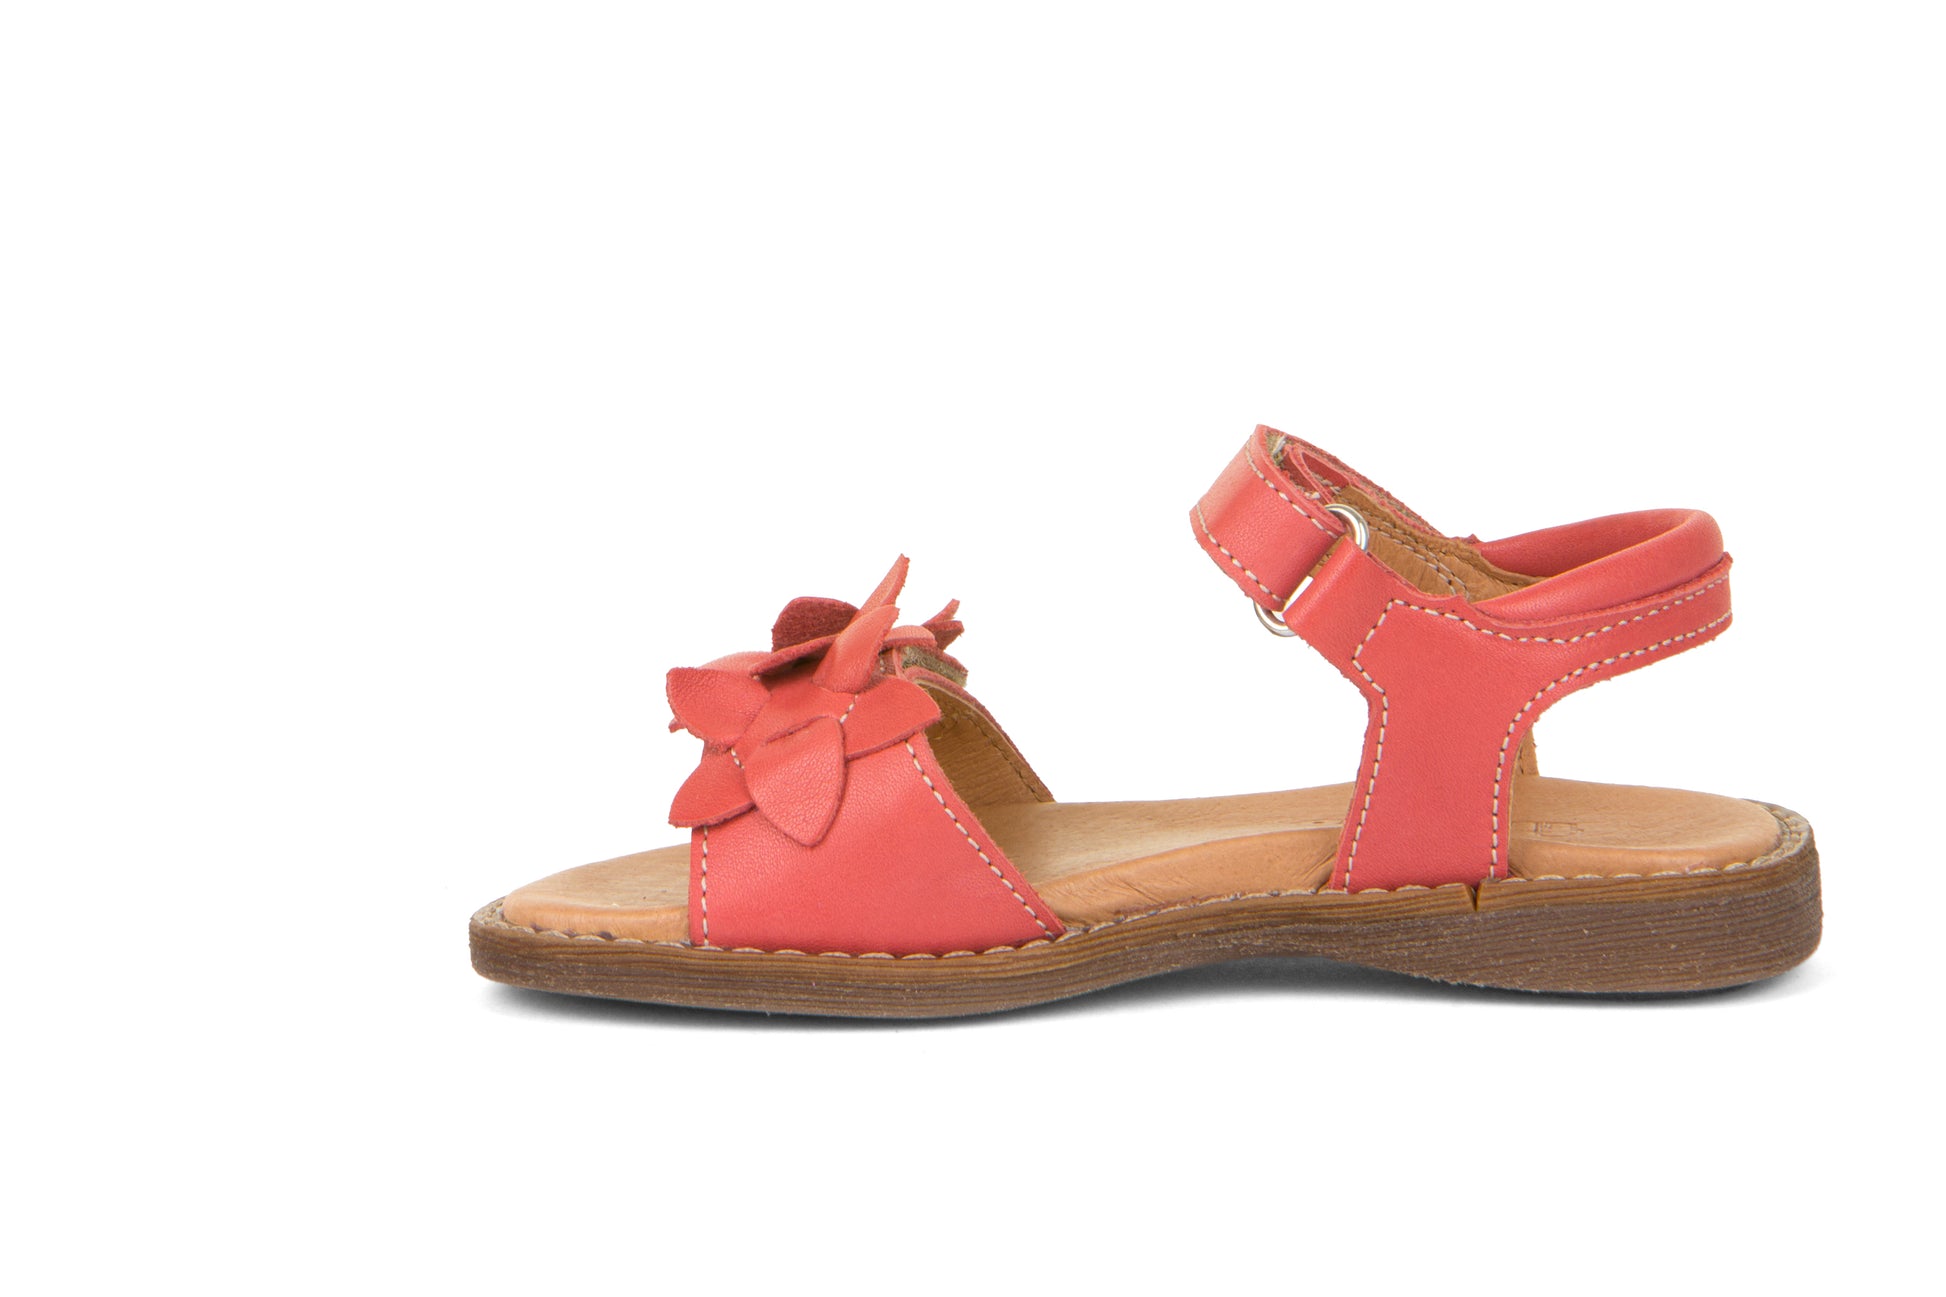 A girls sandal by Froddo, style G3150228-9 Lore Flowers, in coral with flowers detail, velcro fastening. Right inside view.